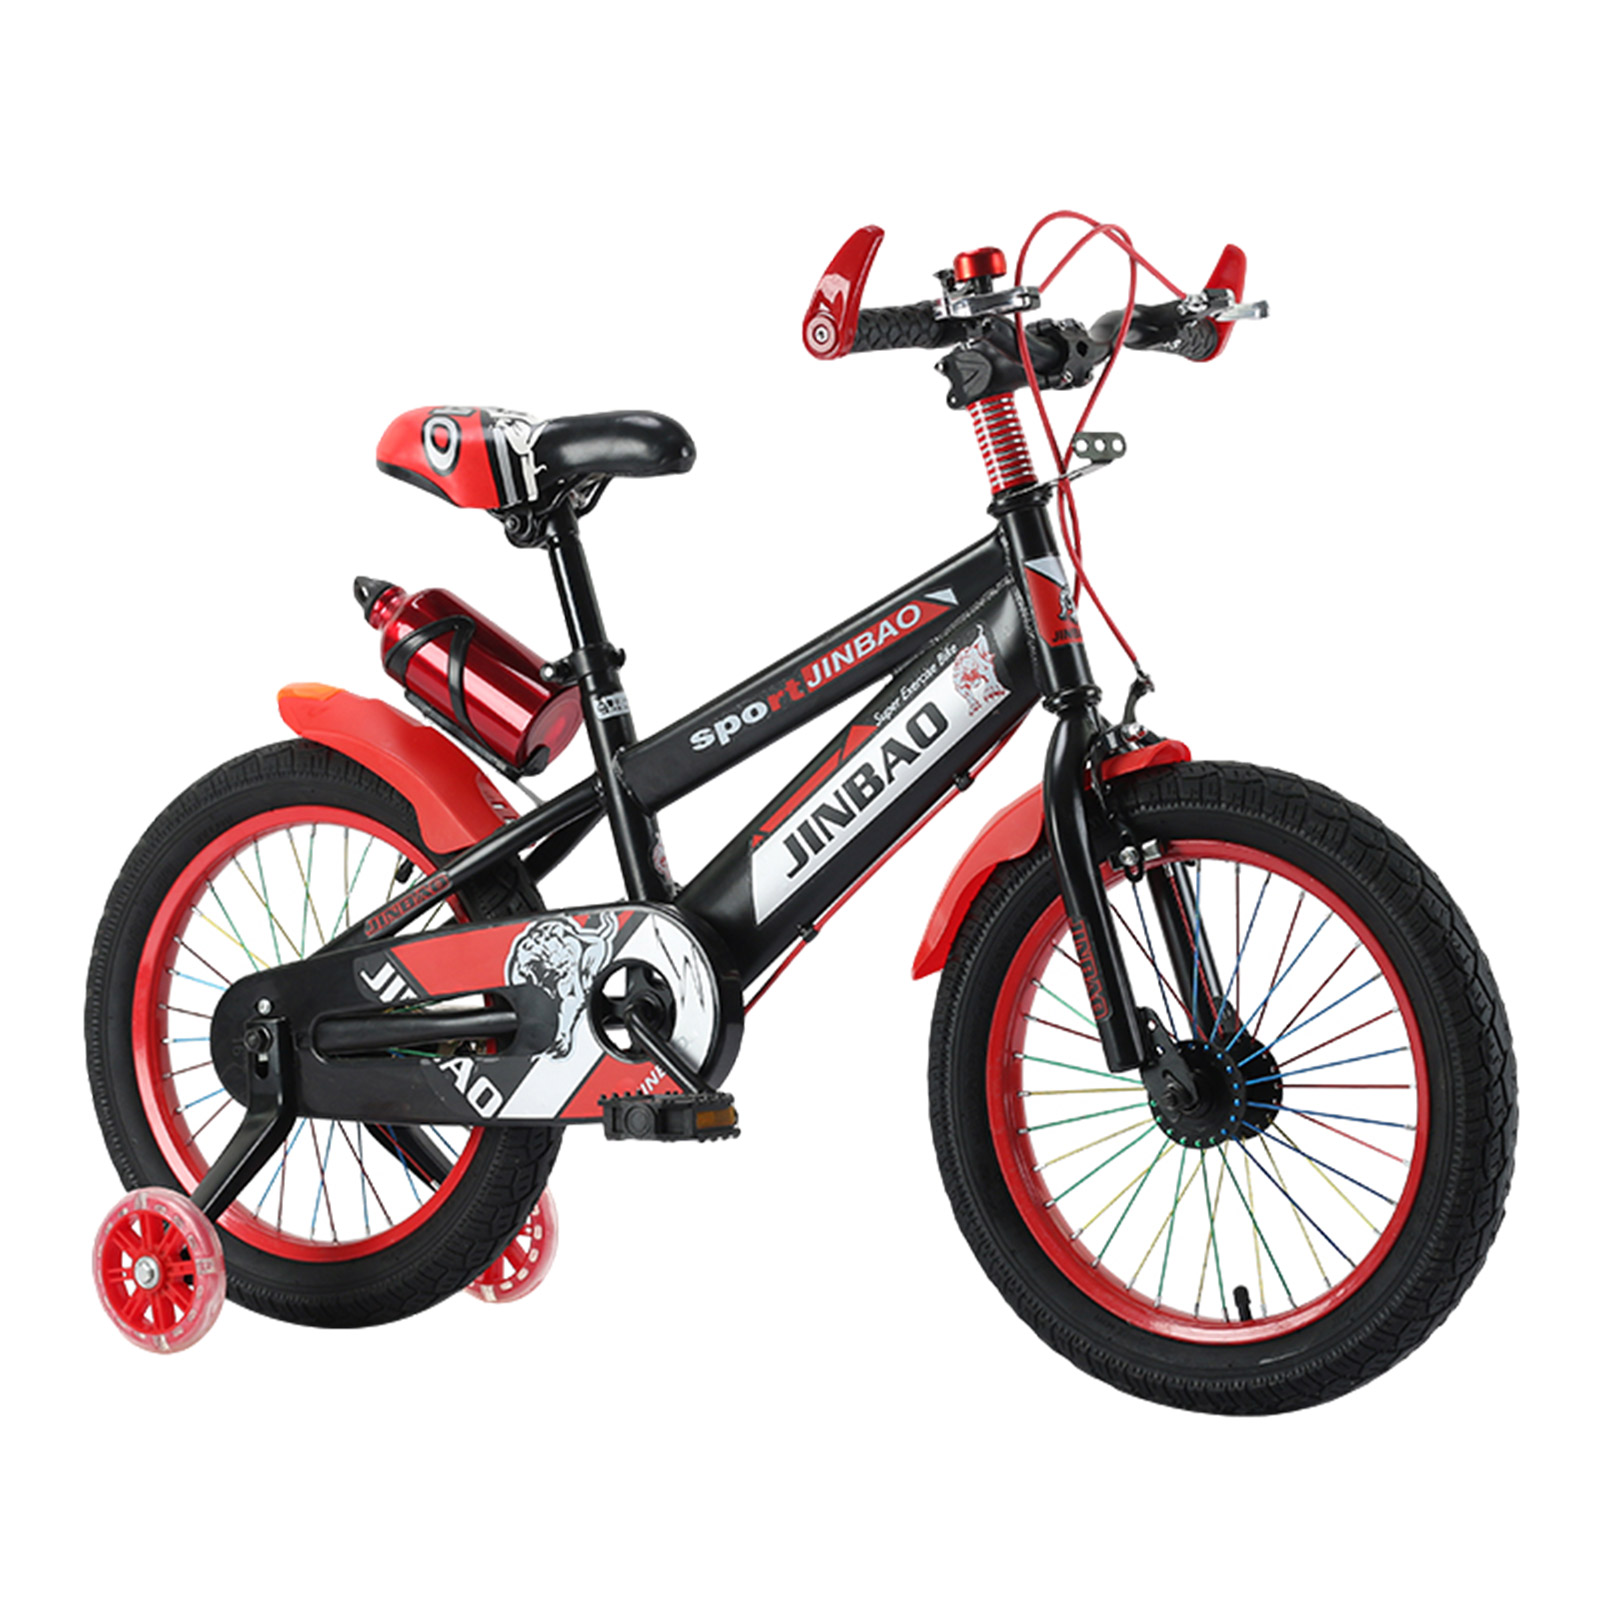 

18 Inch Freestyle Children Bicycle Non-slip Grip Balance Bike For Boys Girls With Training Wheels Outdoor Cycling Balance Bike, Colourful